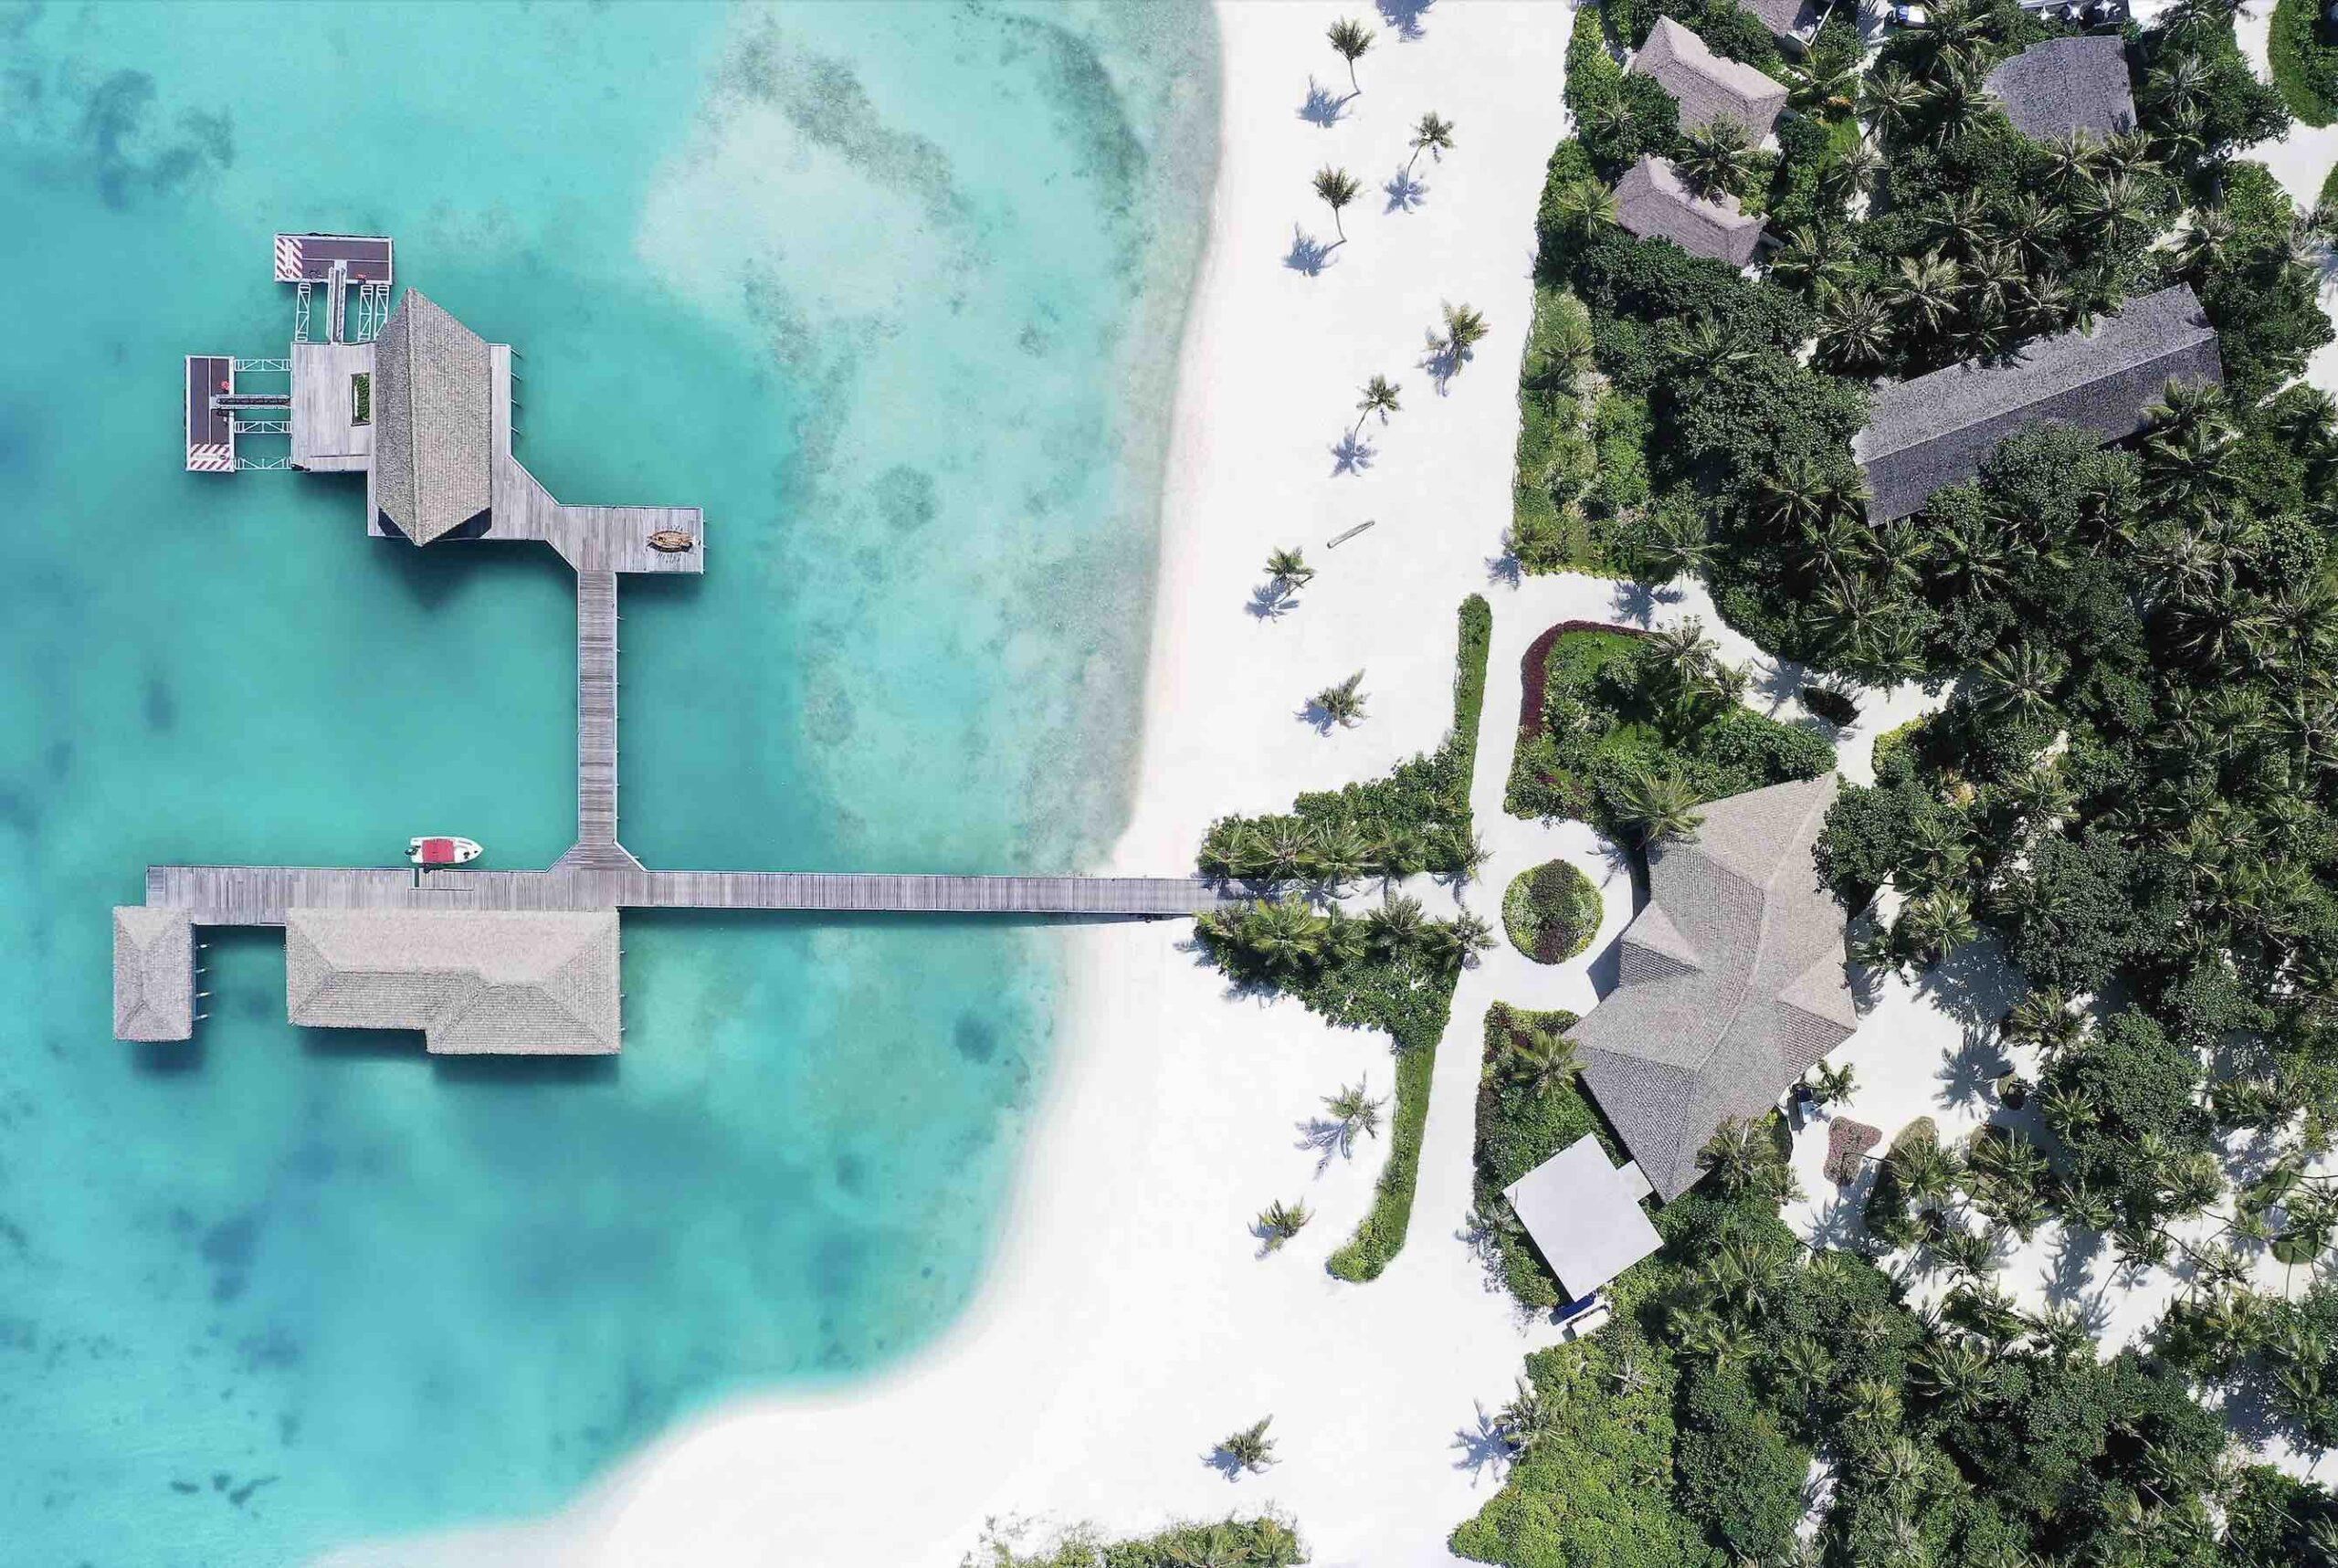 Total tropicality at Le Méridien Maldives Resort and Spa